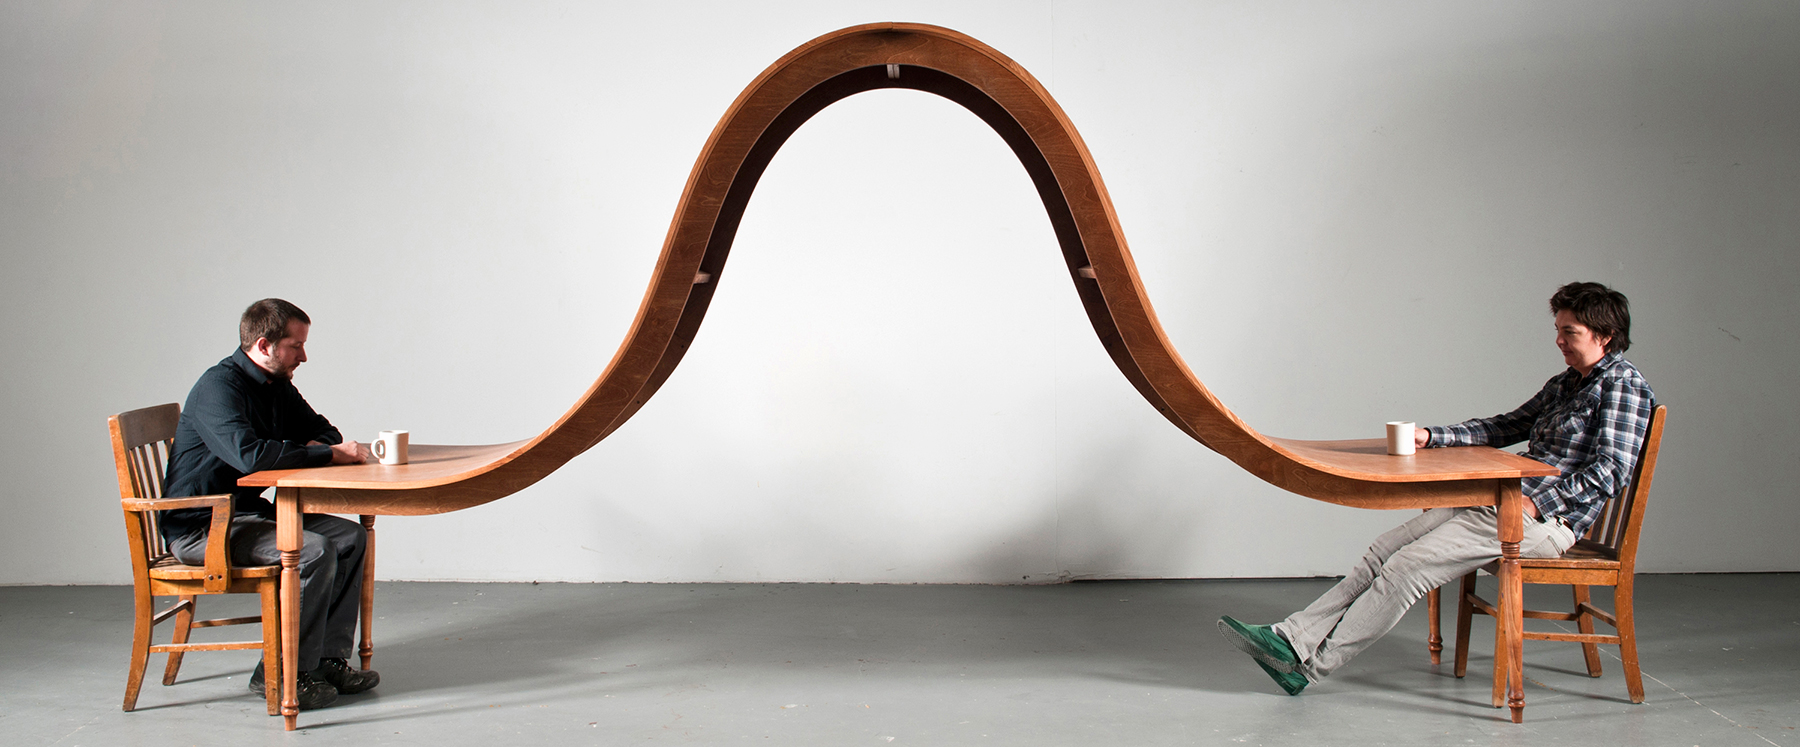 michael beitz turns familiar objects into twisted sculptural scenarios